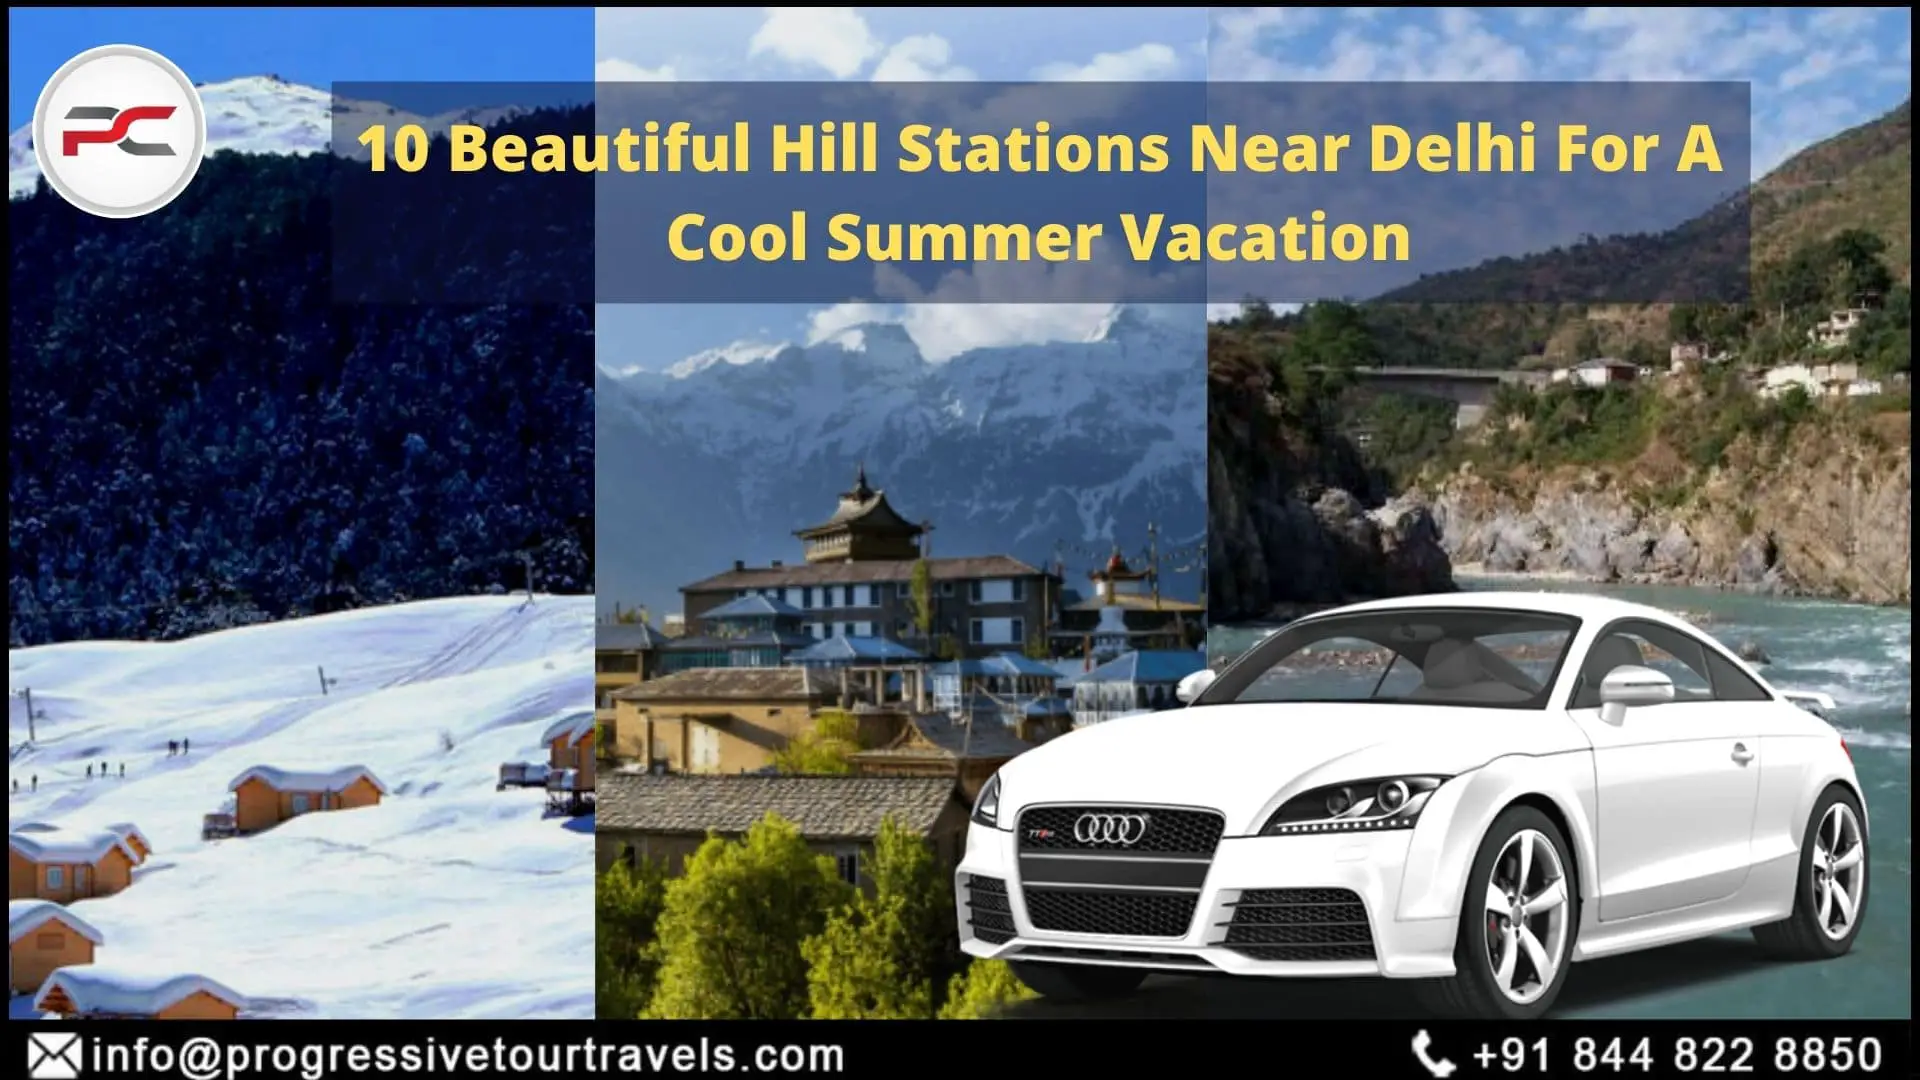 10 Beautiful Hill Stations Near Delhi For A Cool Summer Vacation-66acc6e4